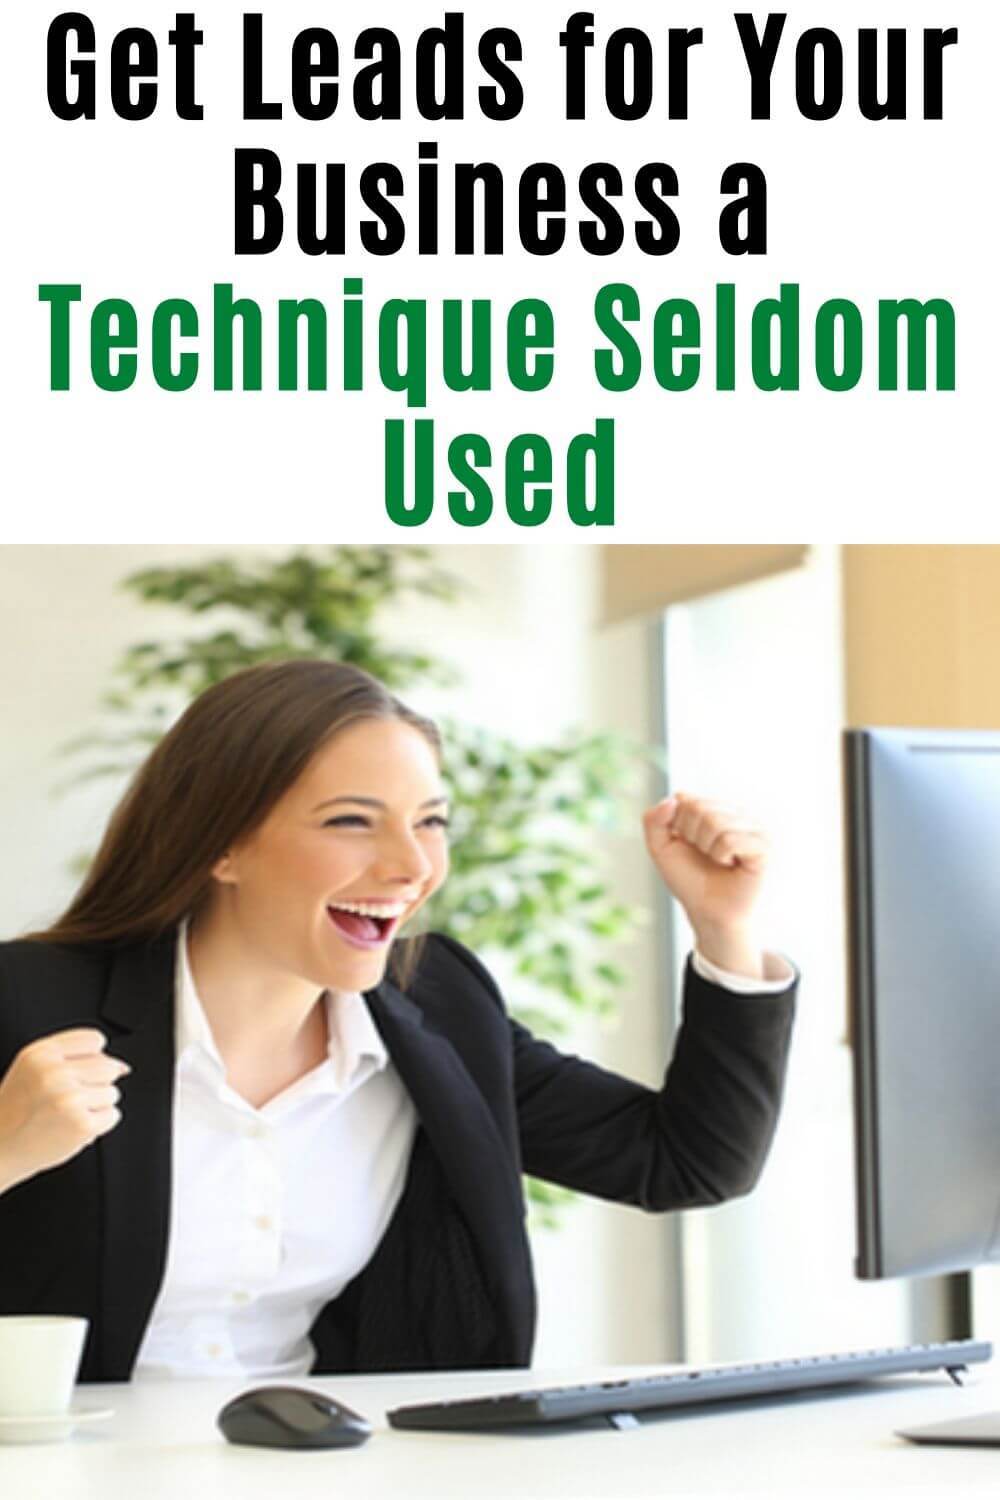 Get leads for your business a technique seldom used